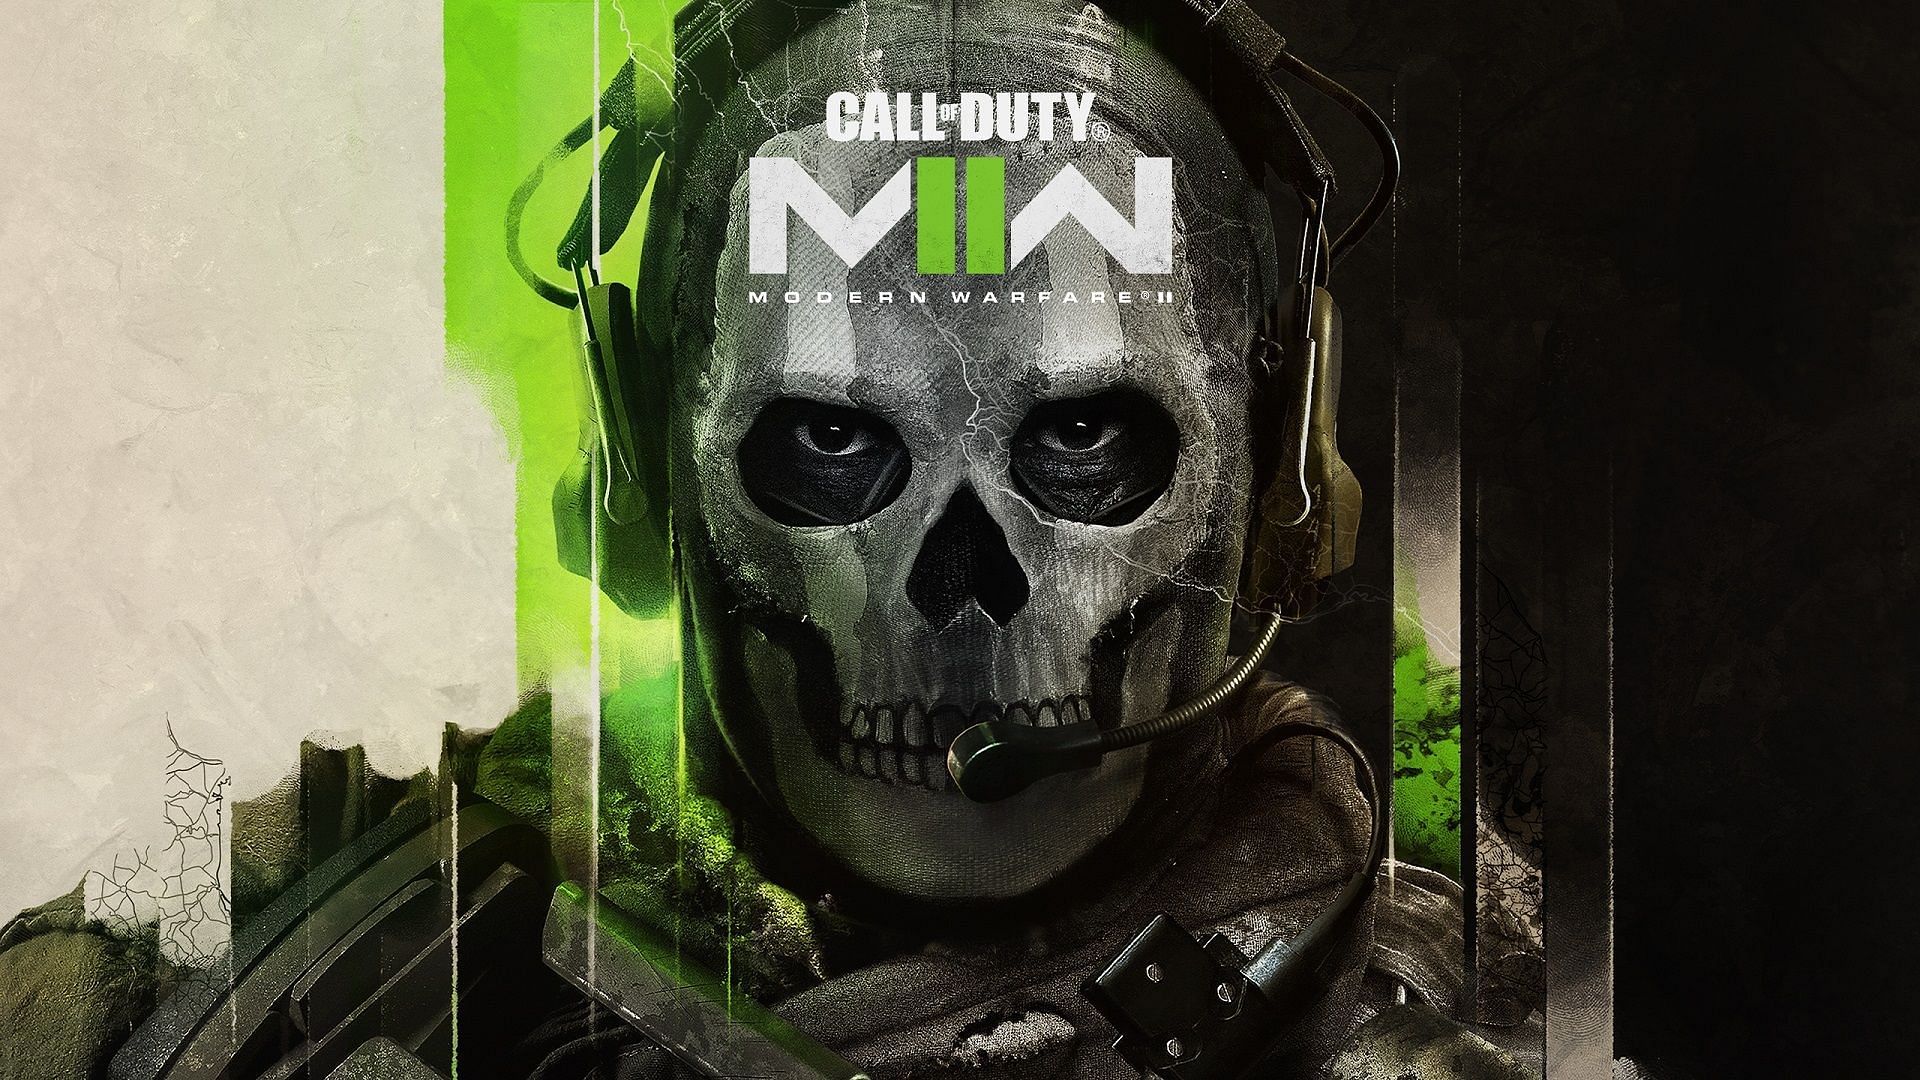 Ghost from Modern Warfare 2 in the center with a MW2 logo positioned at center top. 